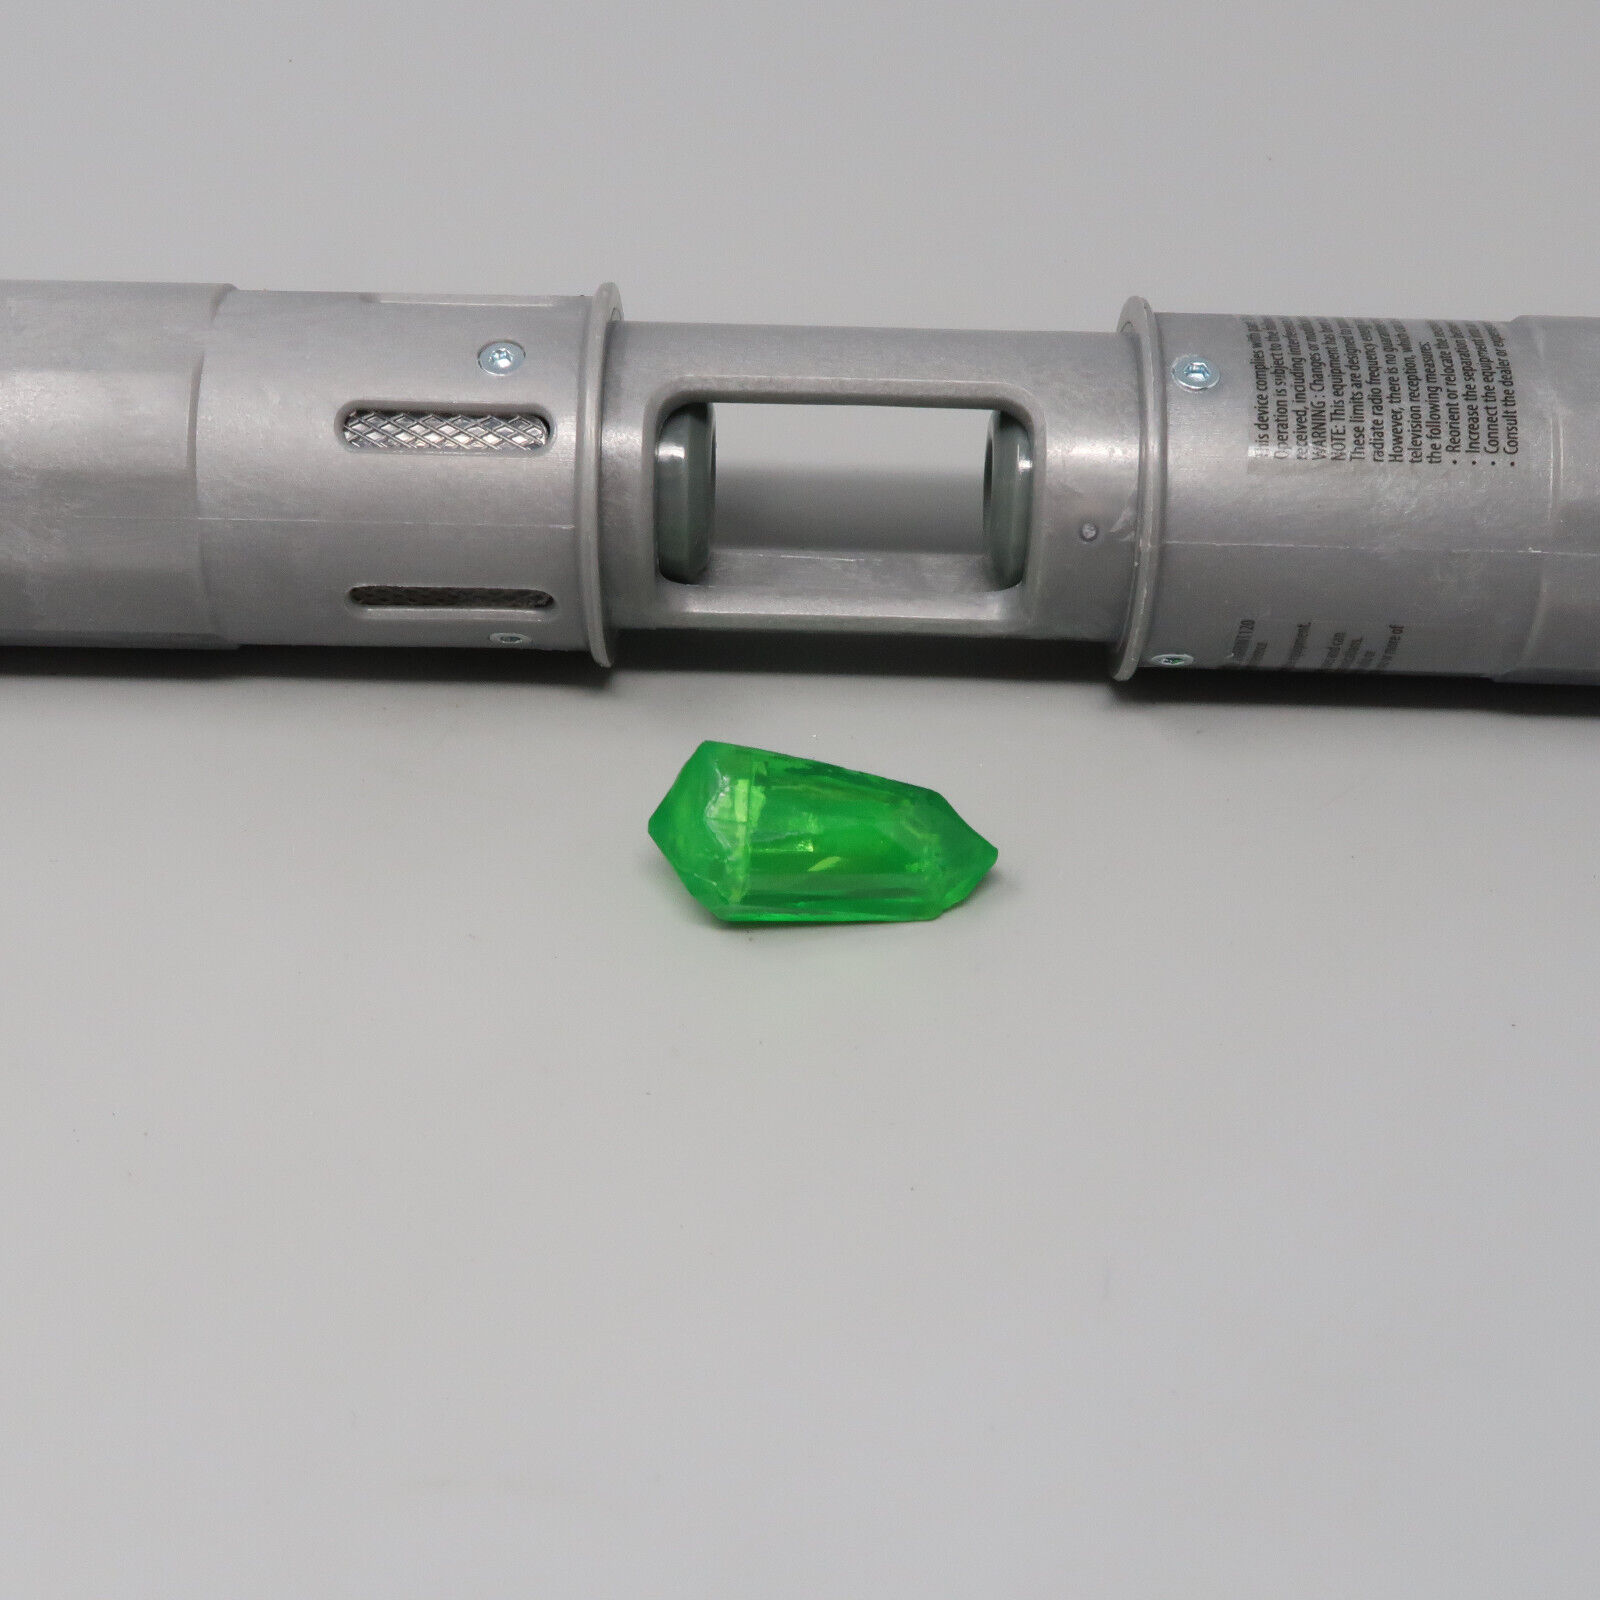 Savi’s Workshop Chassis Hilt Star Wars Galaxy Lightsaber with Green Kyber NEW 